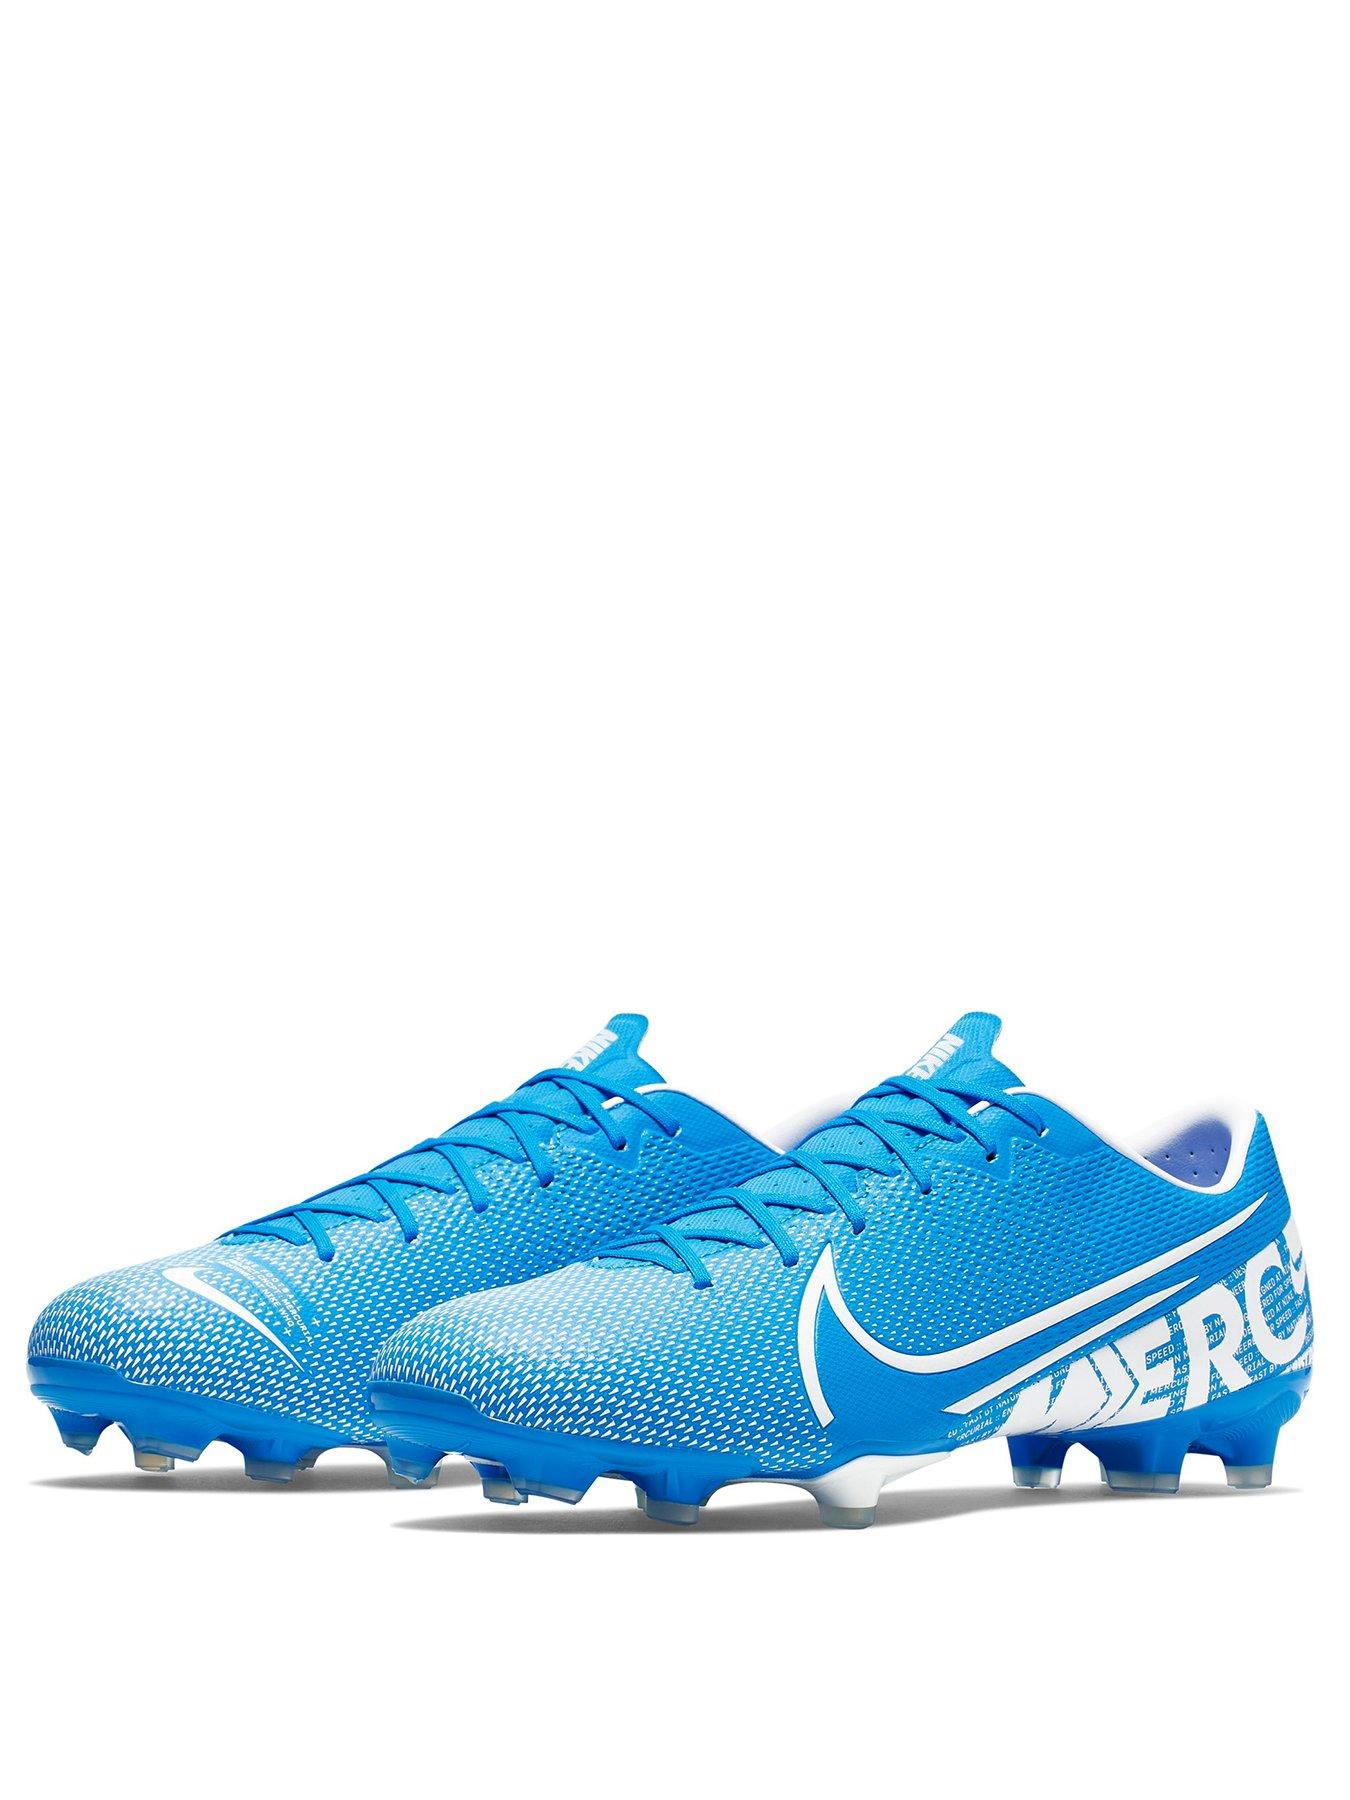 Nike Rugby Boots Nike Mercurial Vapor IV FG Firm Gound